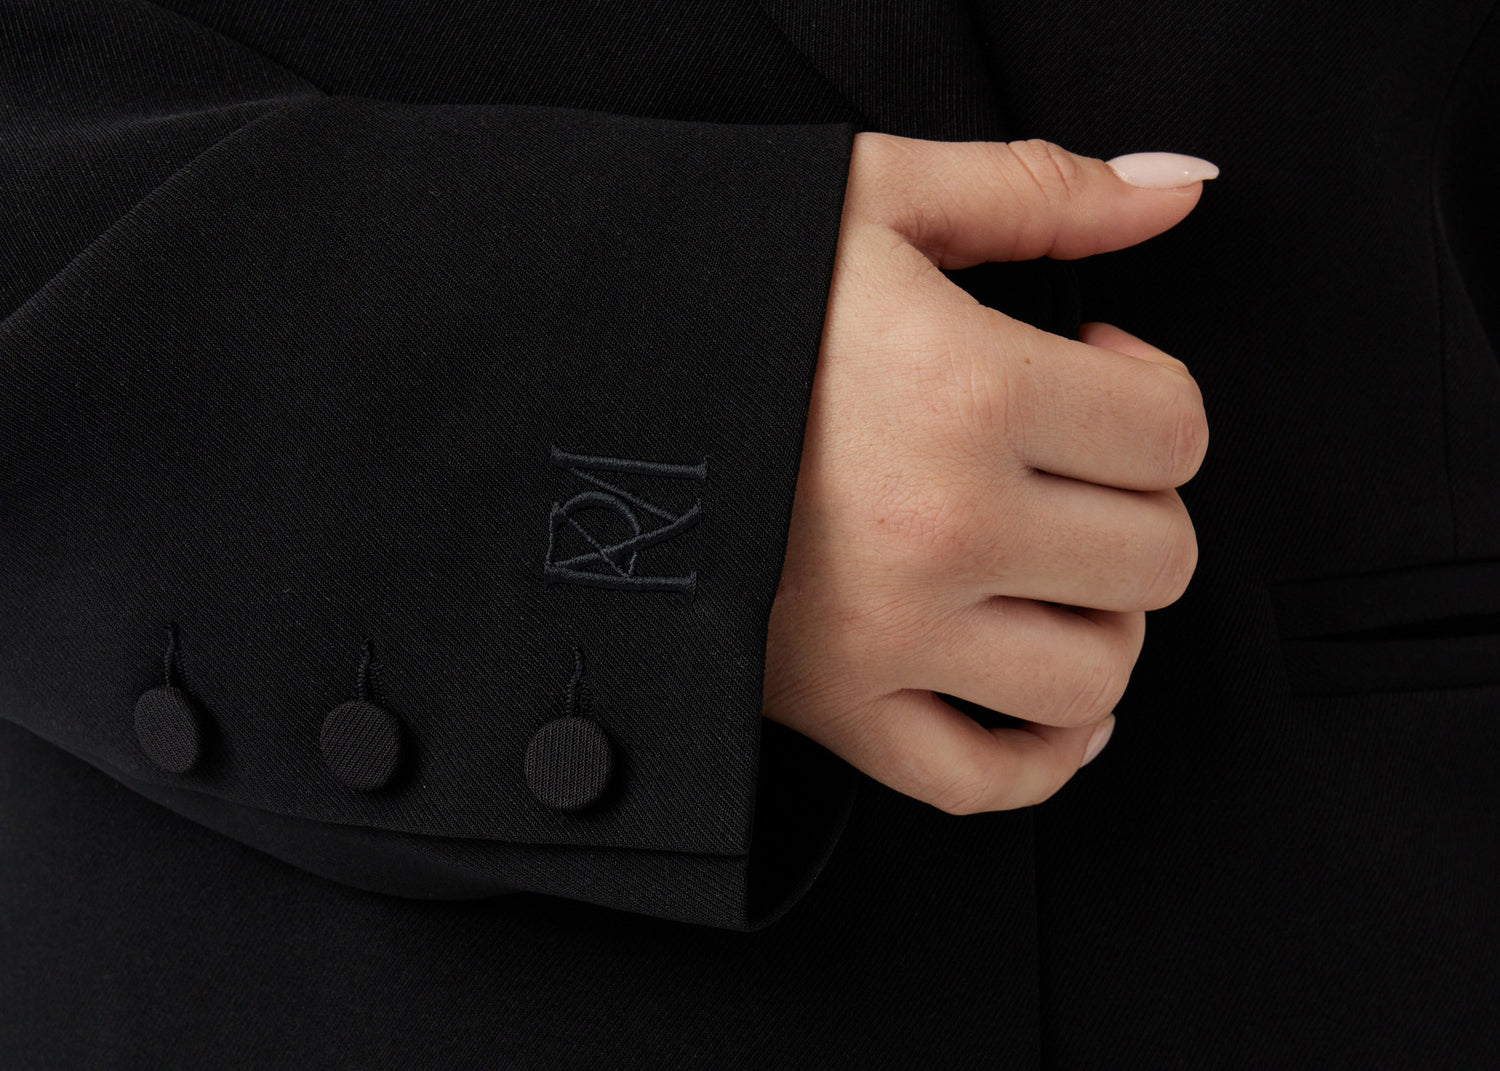 Close up image of an embroidered brand mark on the right hand sleeve of a minimalistic black blazer